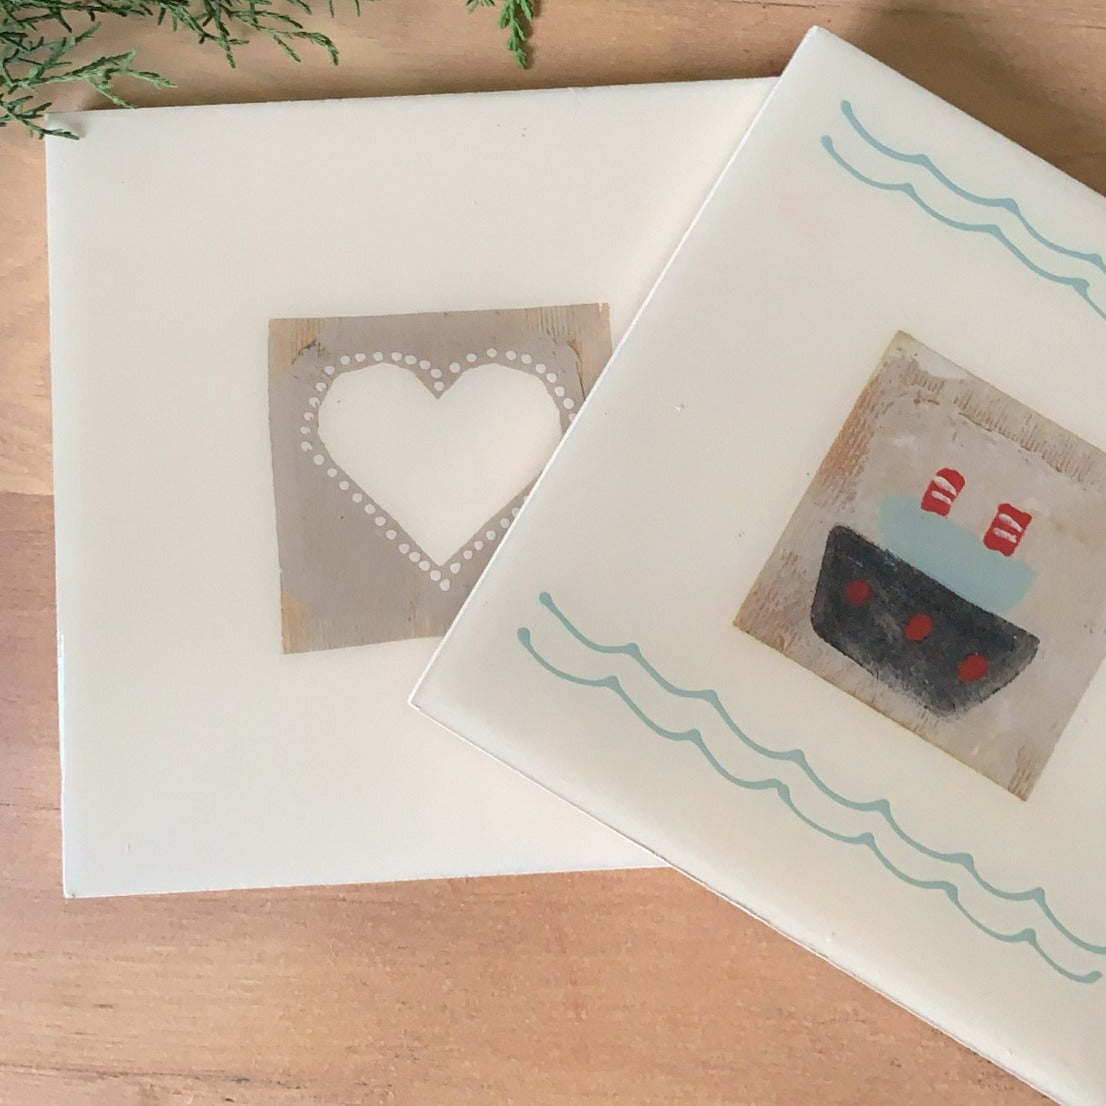 Trivets with recycled tea bags and designs. Heart and sailboat.